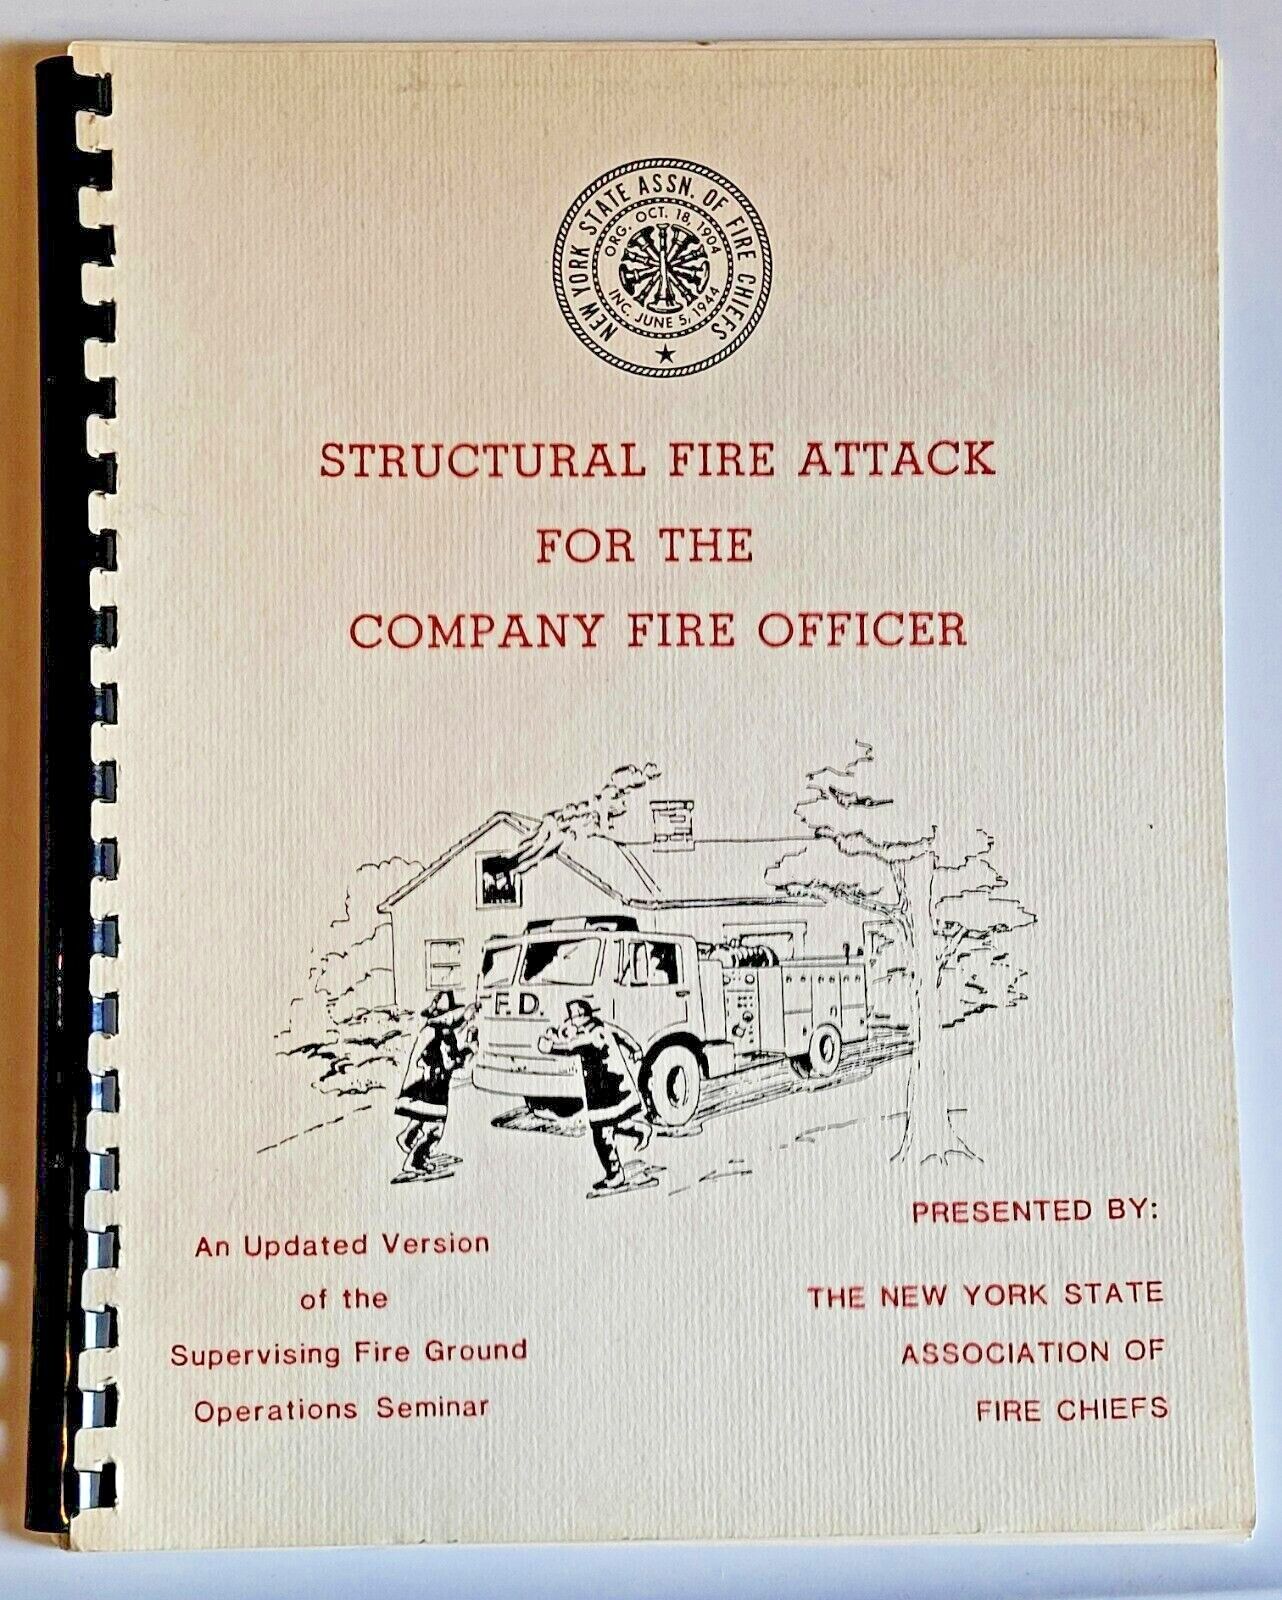 Structural Fire Attack for the Company Fire Officer, New York 1985